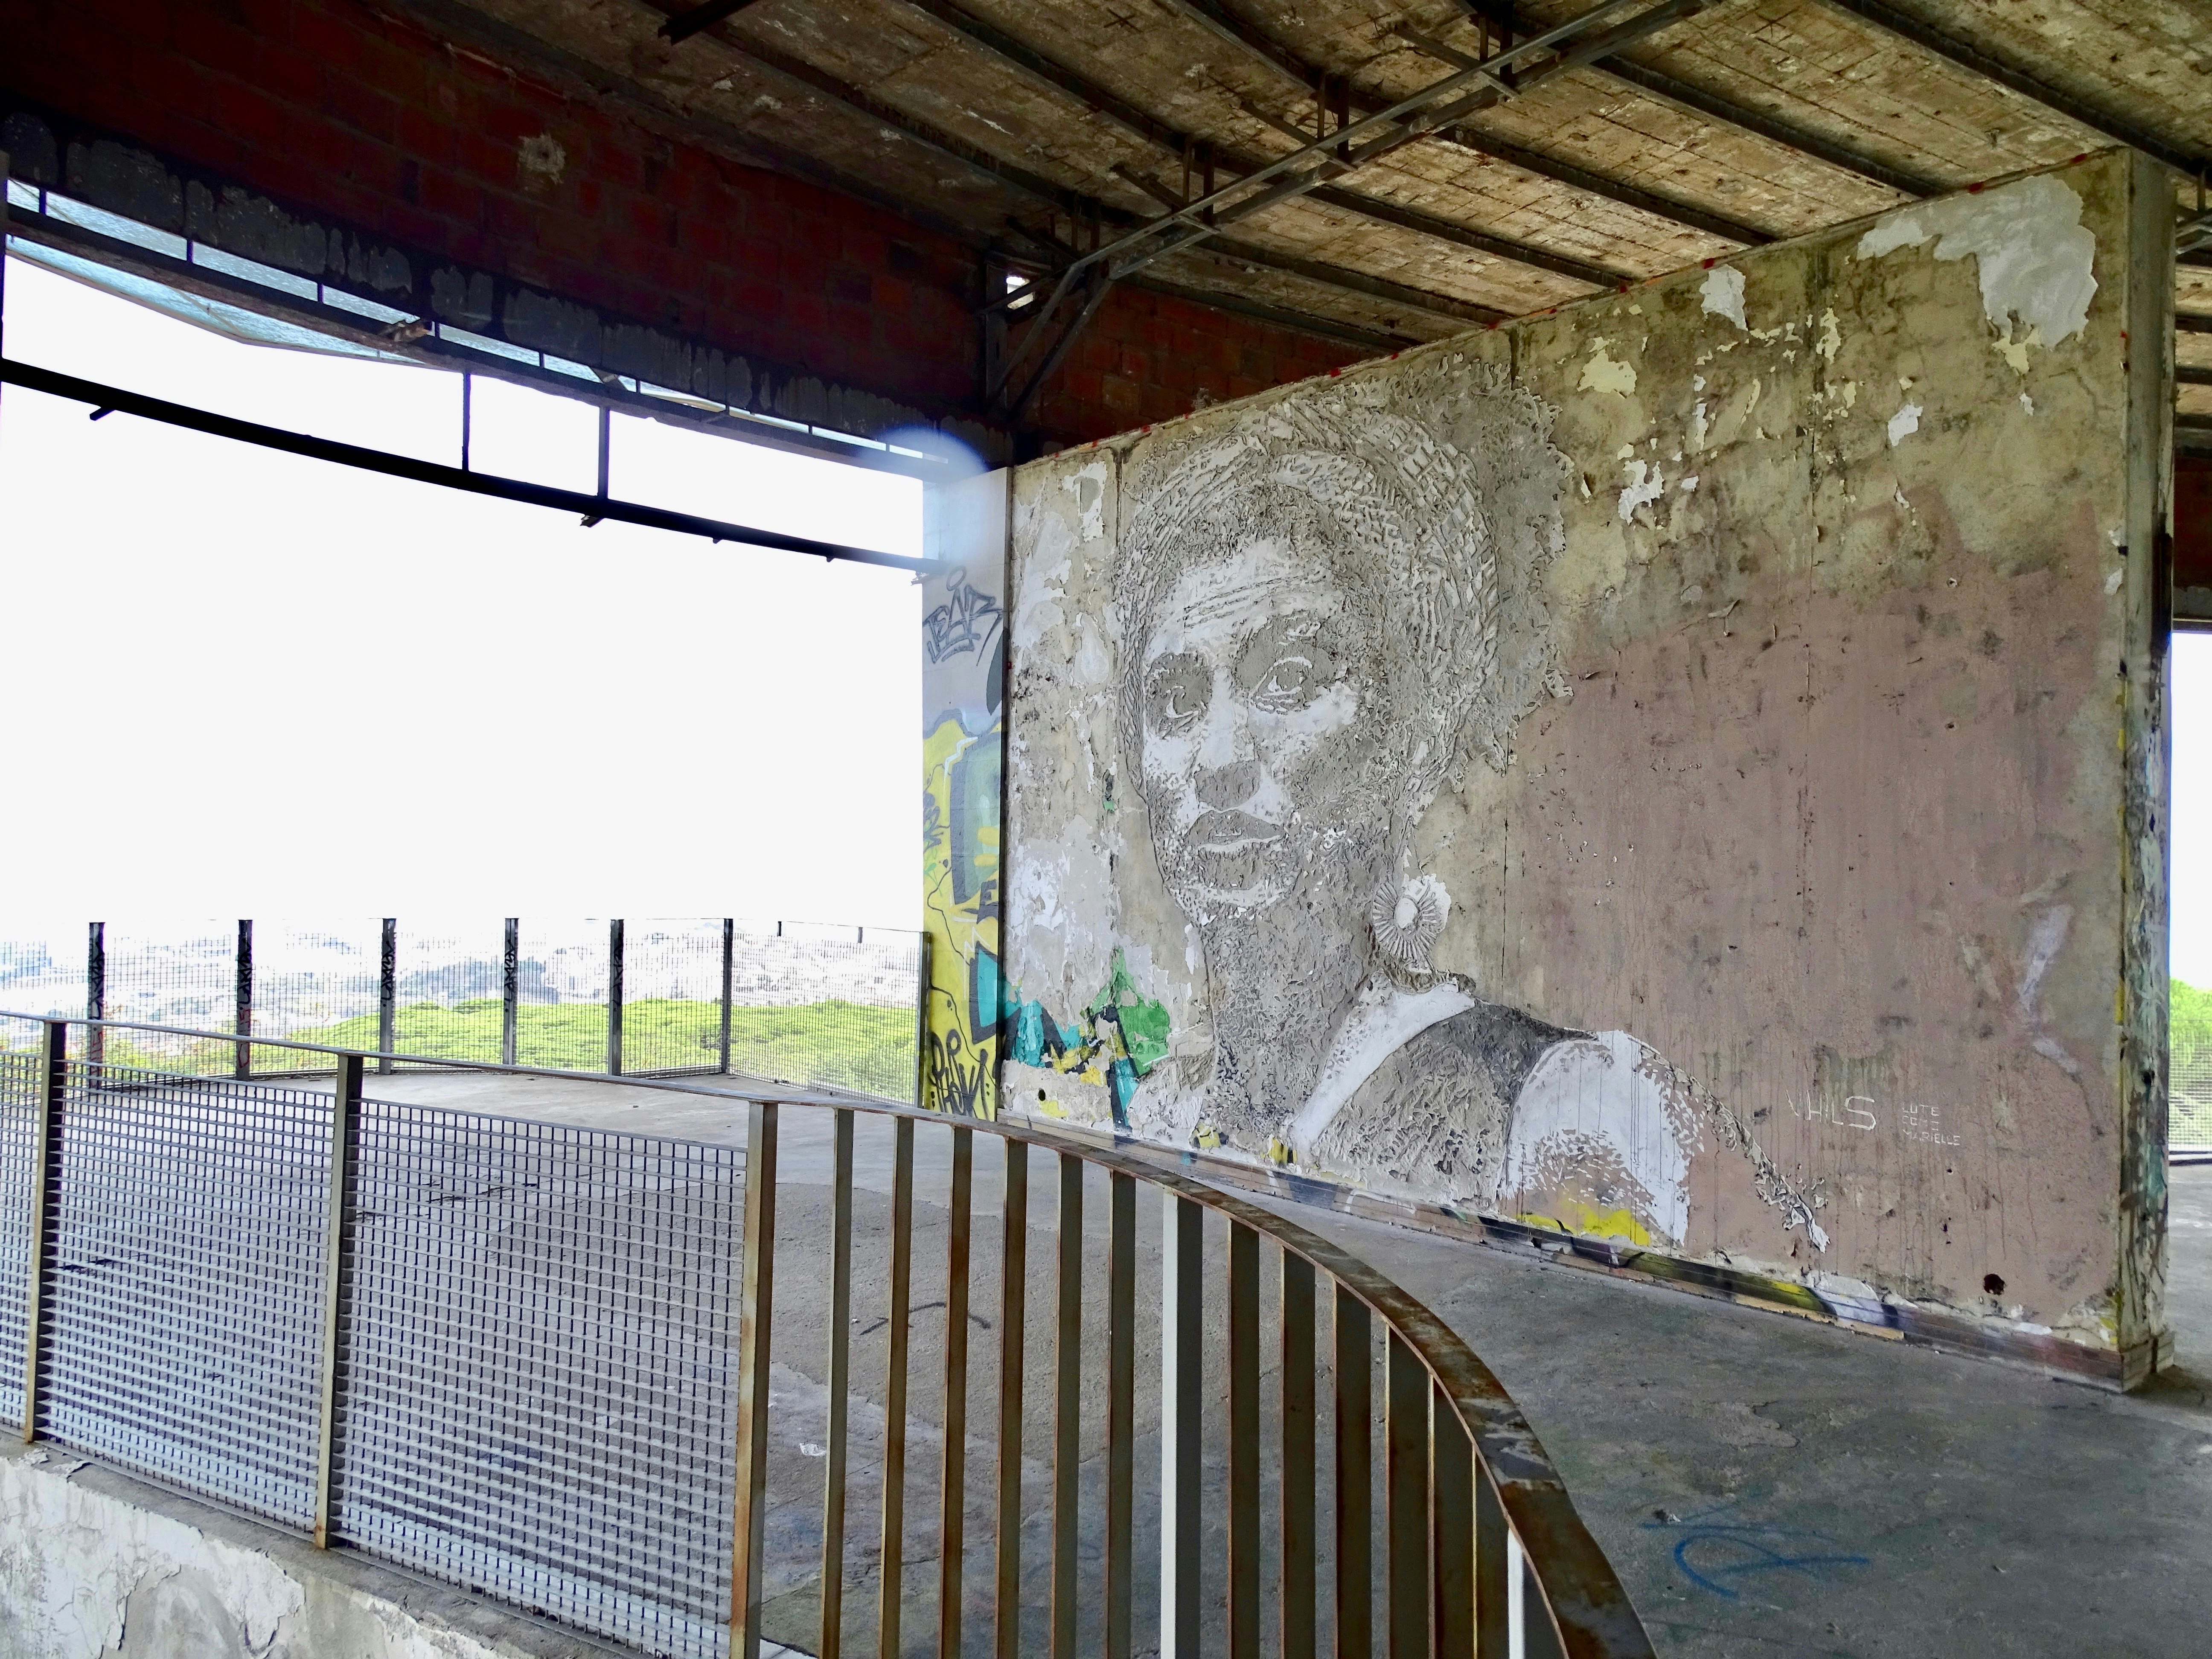 A black and white mural of a woman, taking up the whole cracked concrete wall with a view of the city behind her.